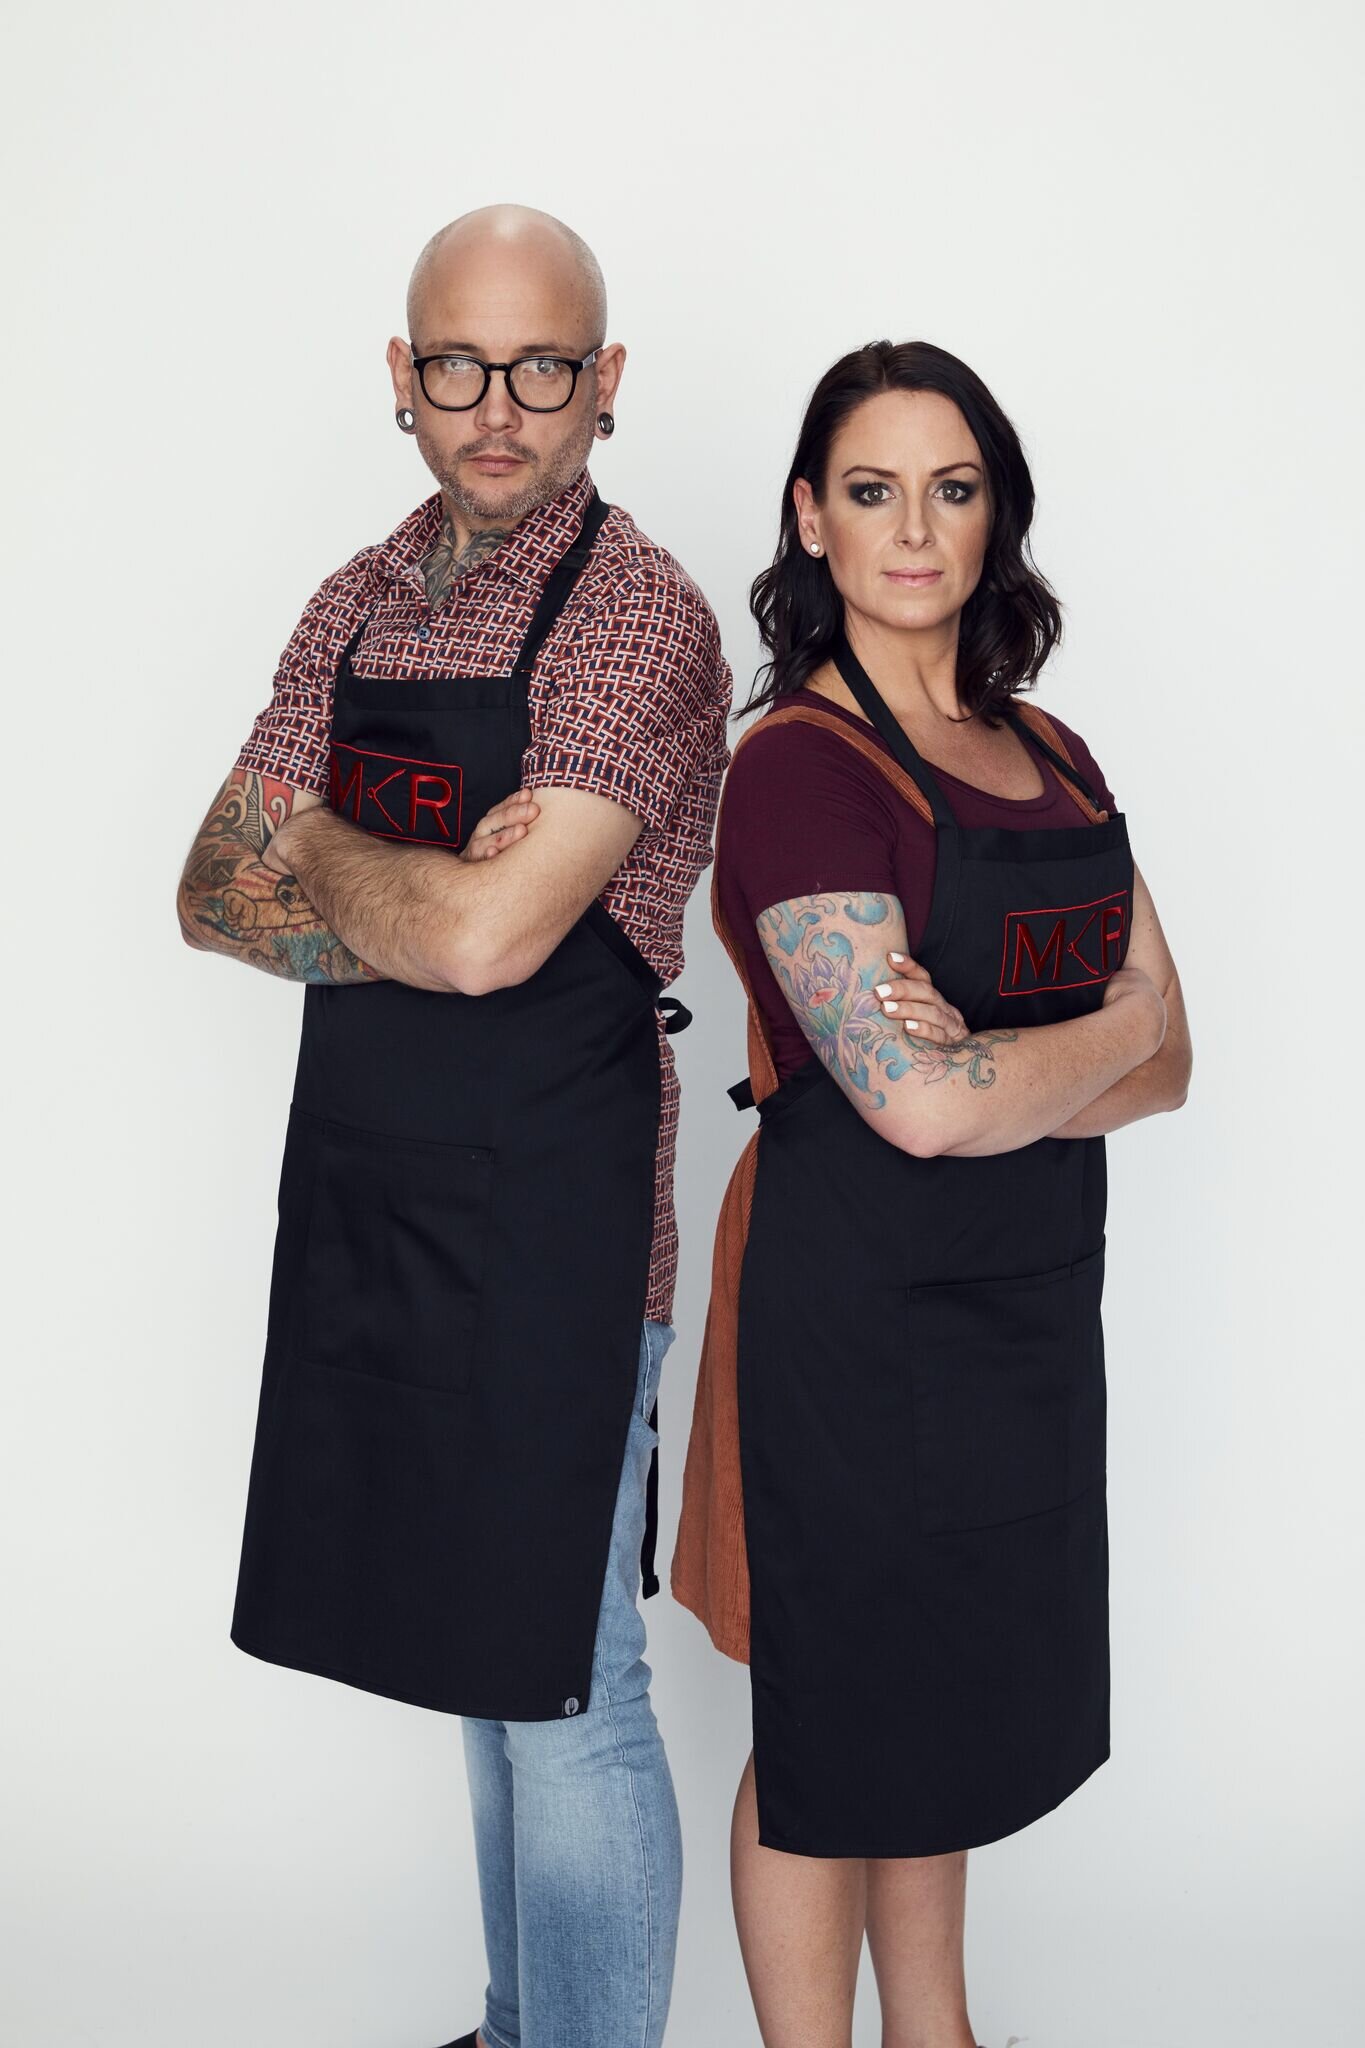   My Kitchen Rules: The Rivals  Source: Seven Network  